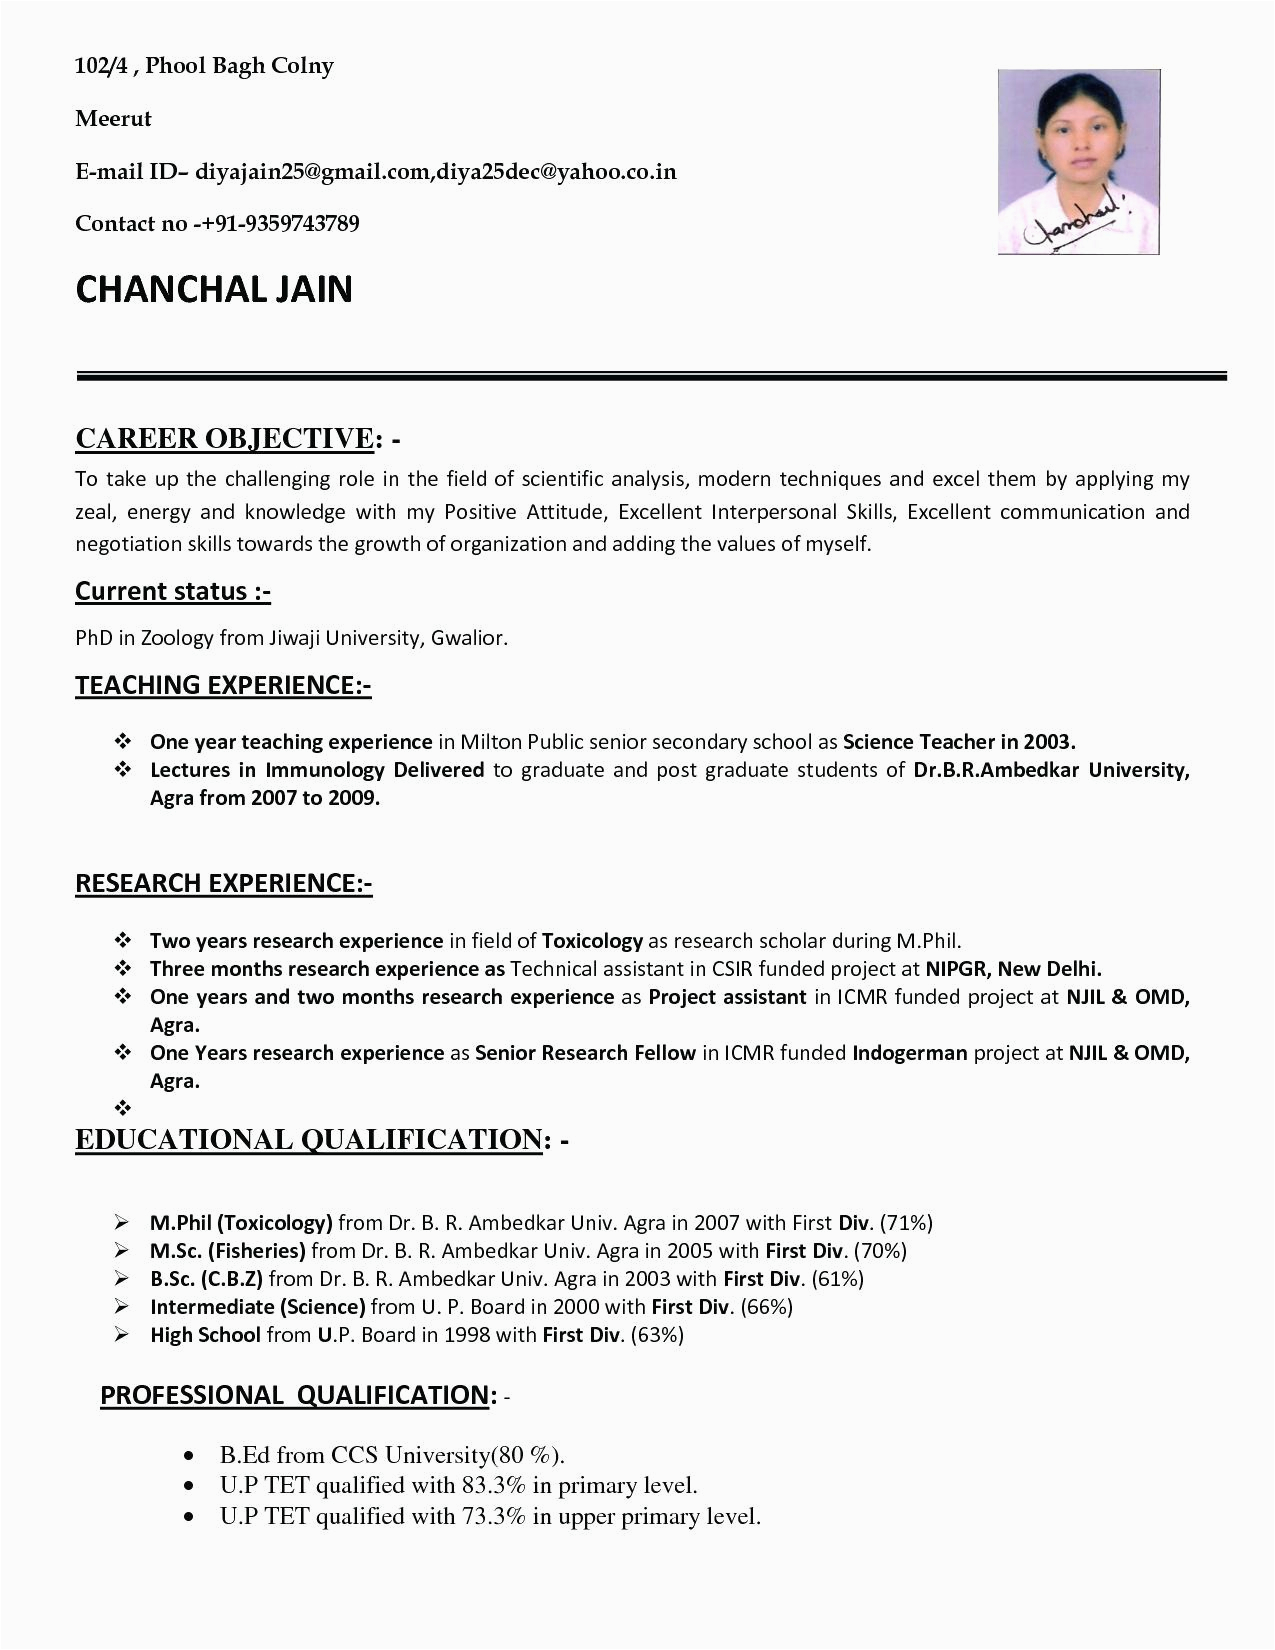 Sample Resume for School Principal Position In India 12 Resumes Elementary Teachers Radaircars